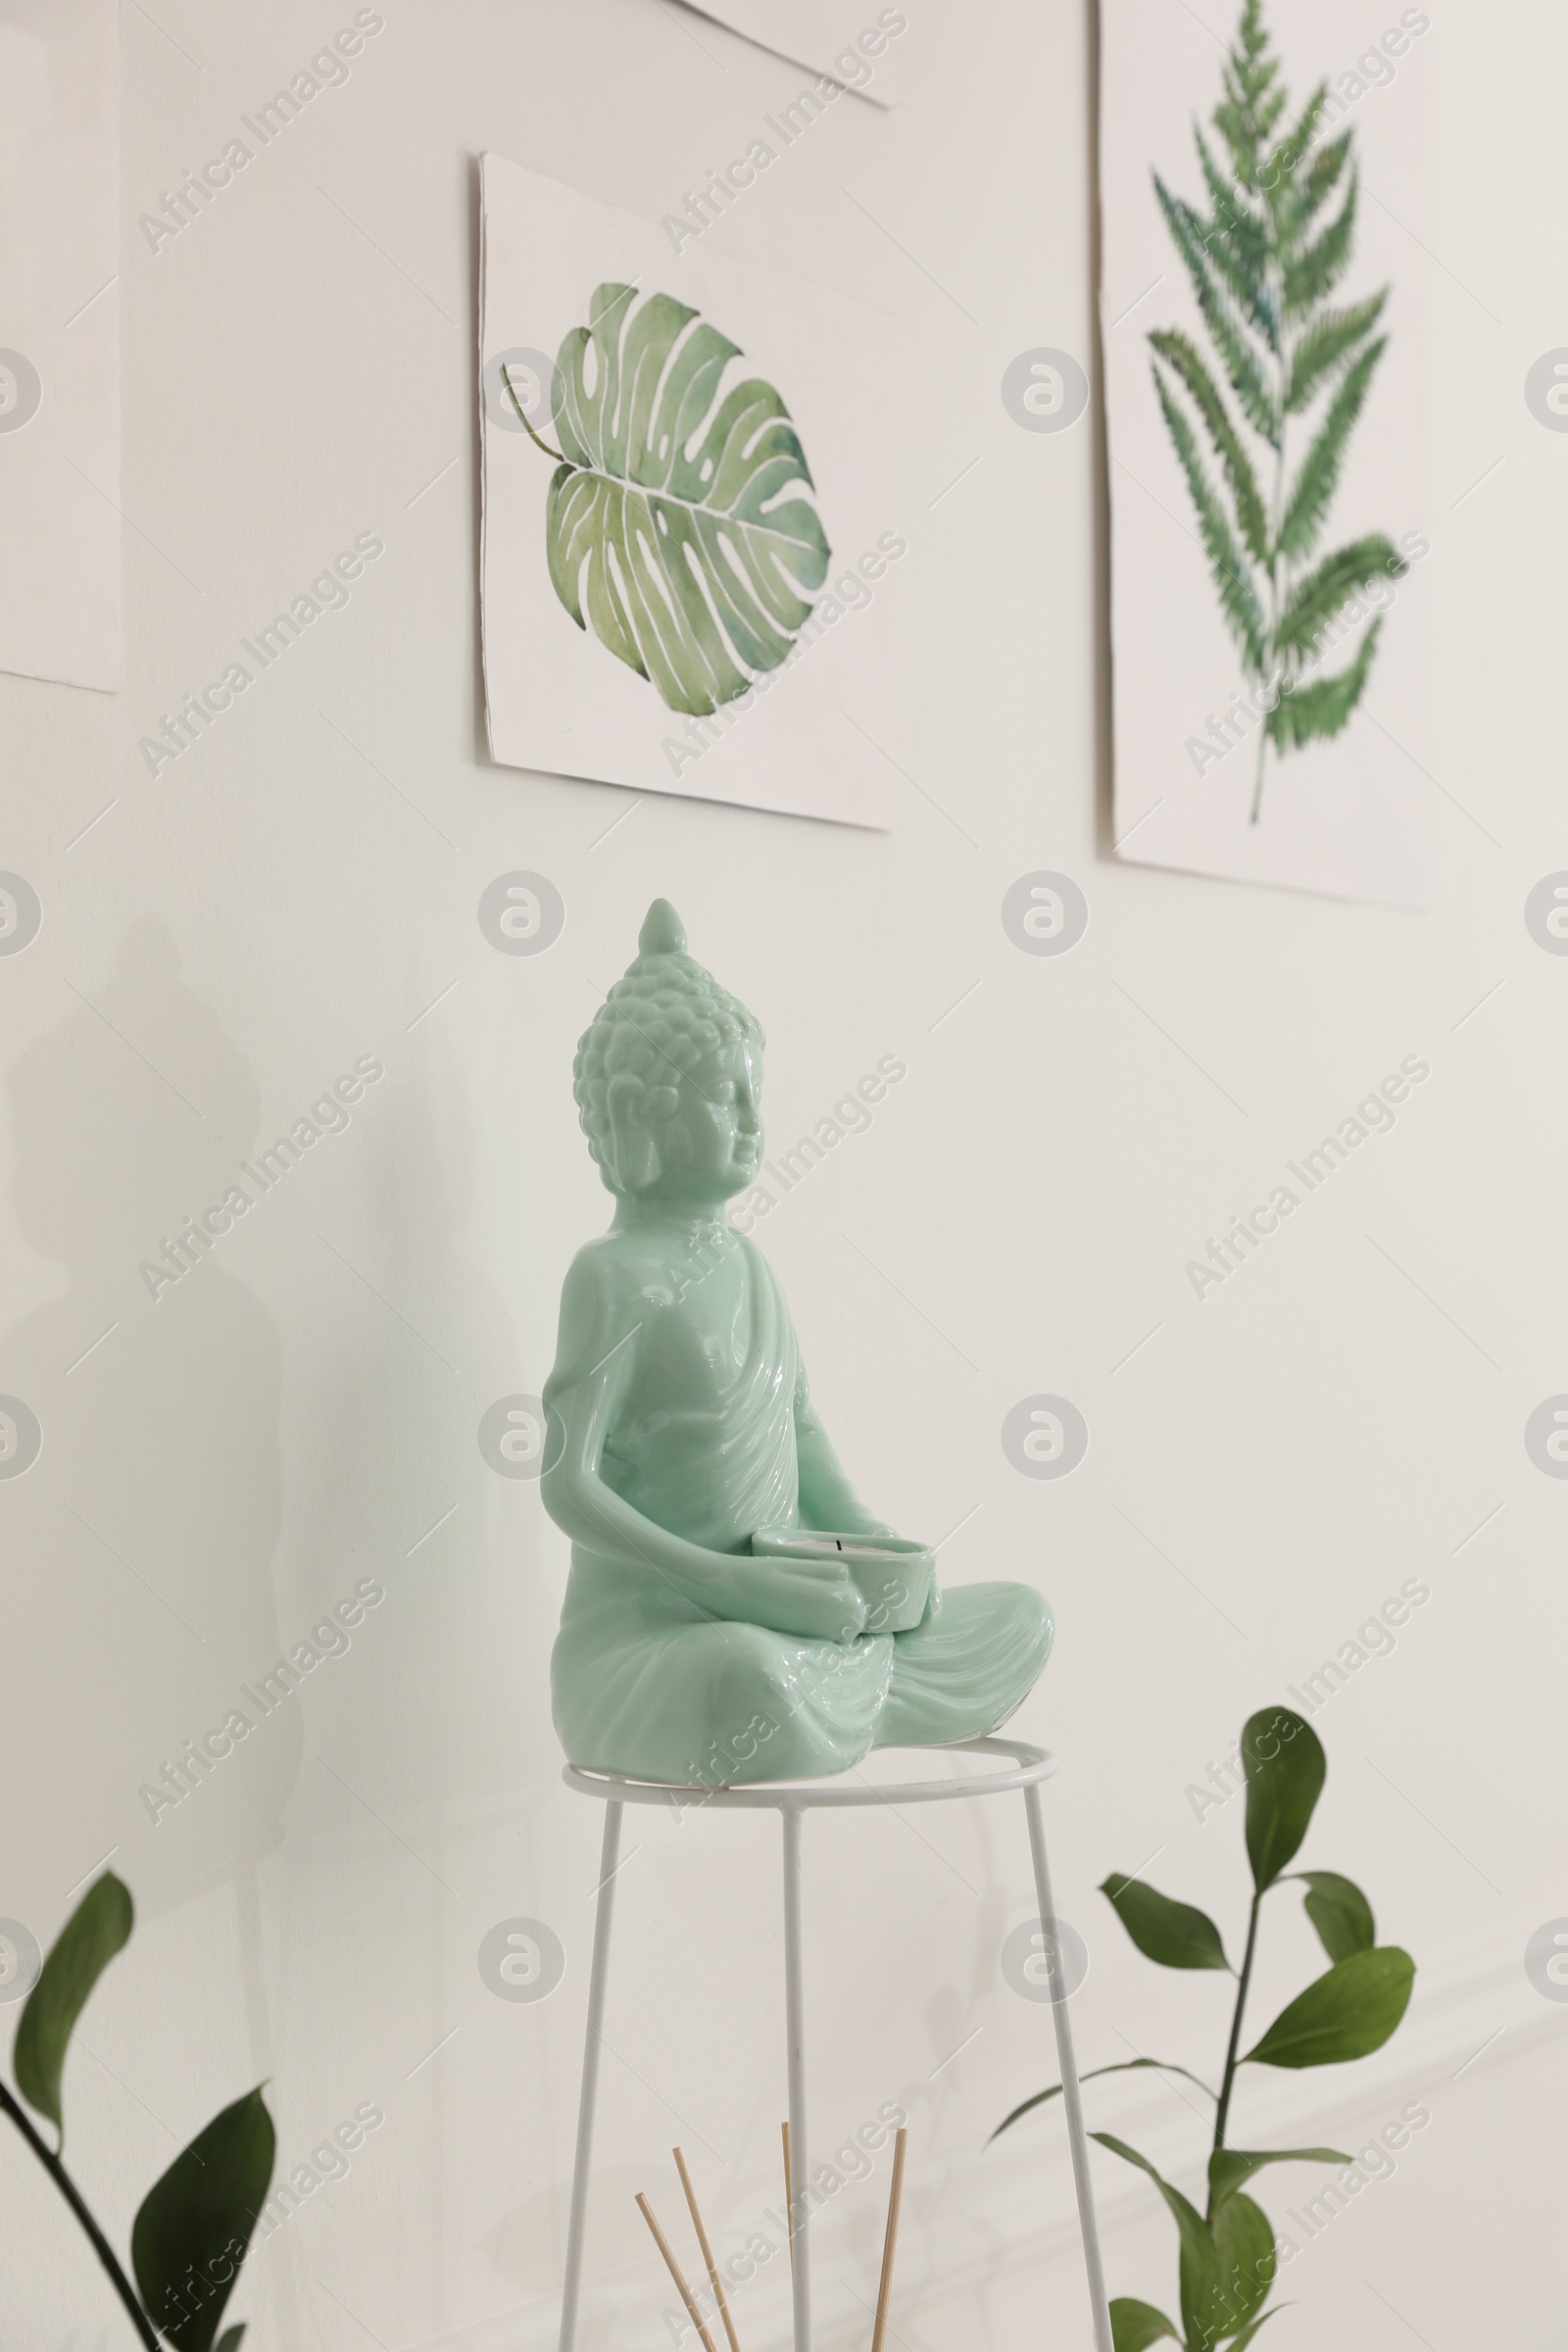 Photo of Ceramic Buddha sculpture near wall with floral paintings indoors. Interior design